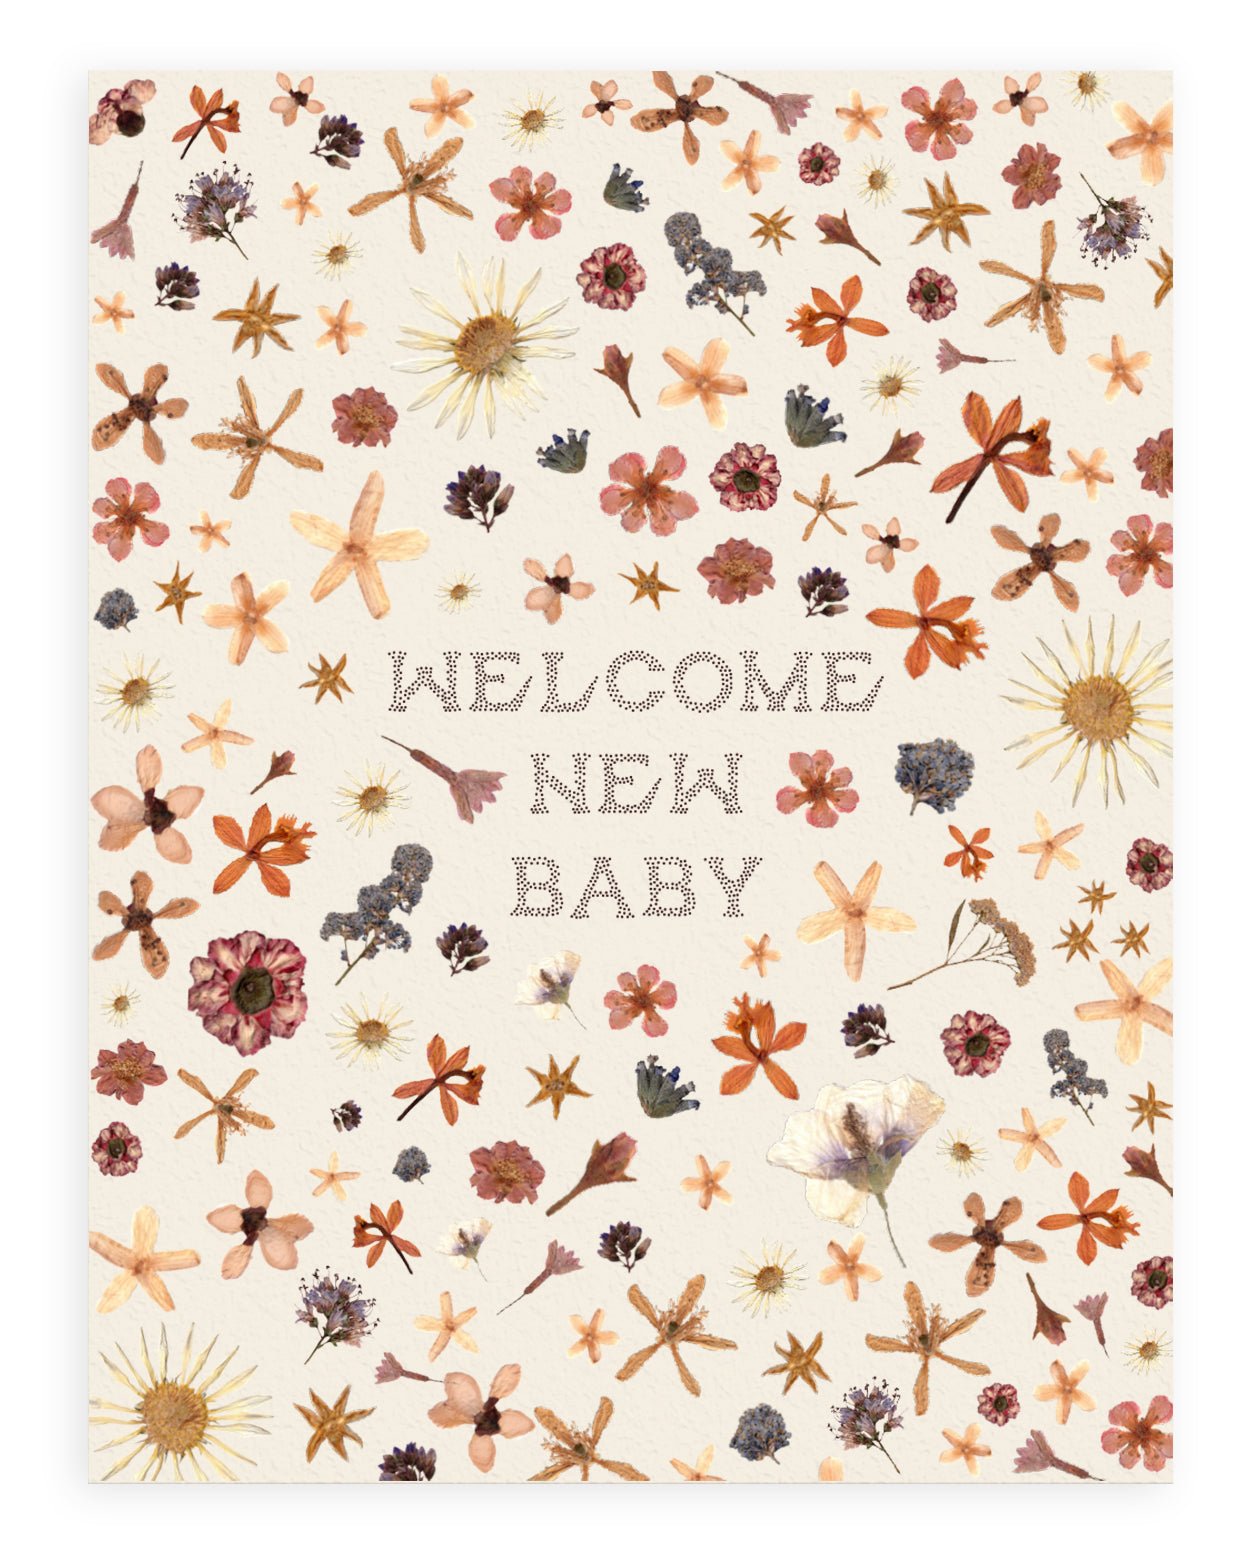 &quot;Welcome New Baby&quot; pointillism font design with tightly spaced pressed flowers on a cream colored background printed on cardstock against a white background.